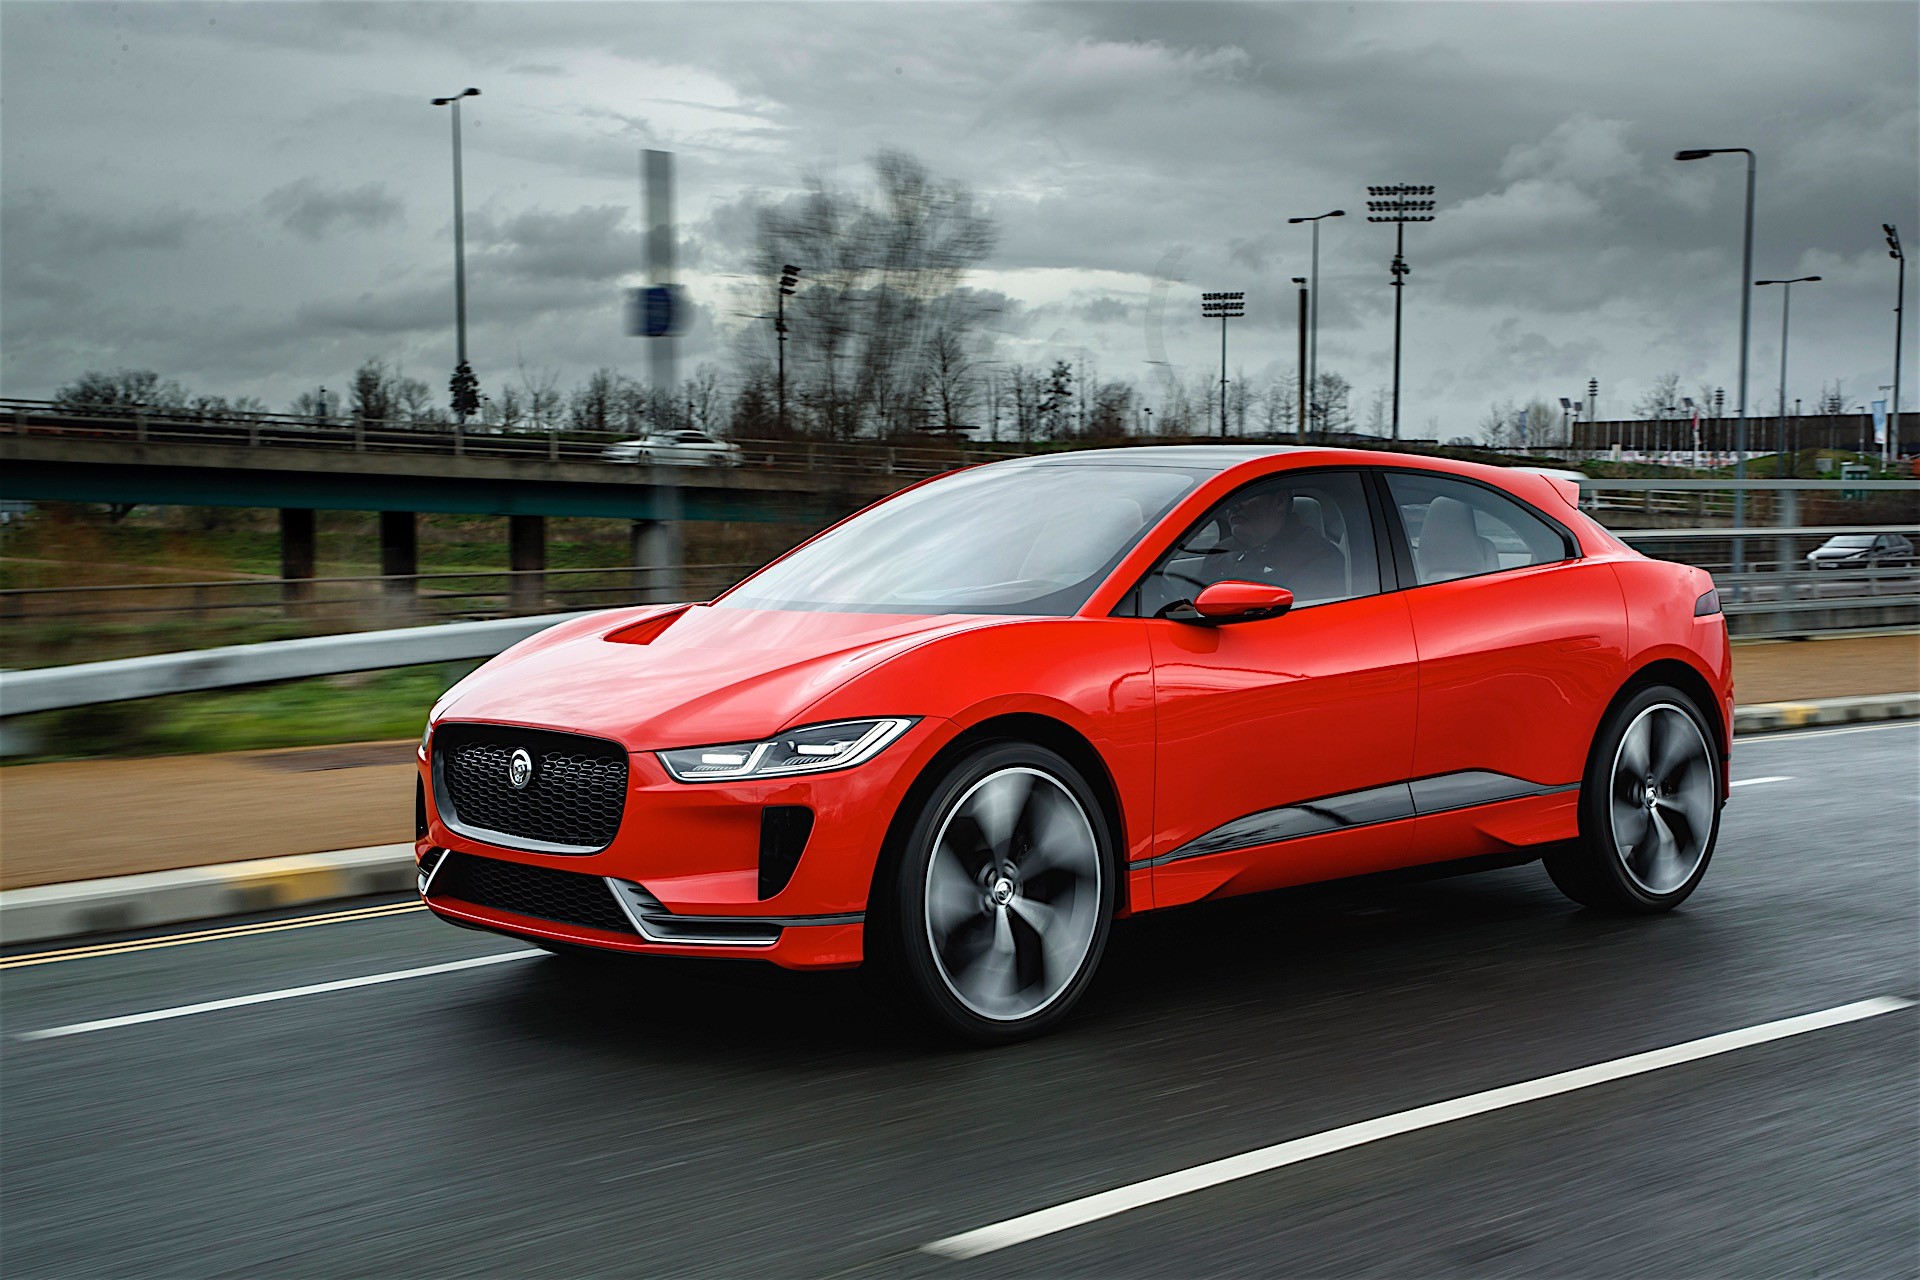 2018 Jaguar I-PACE Is off to a Flying Start with 25,000 Pre-Orders Already - autoevolution